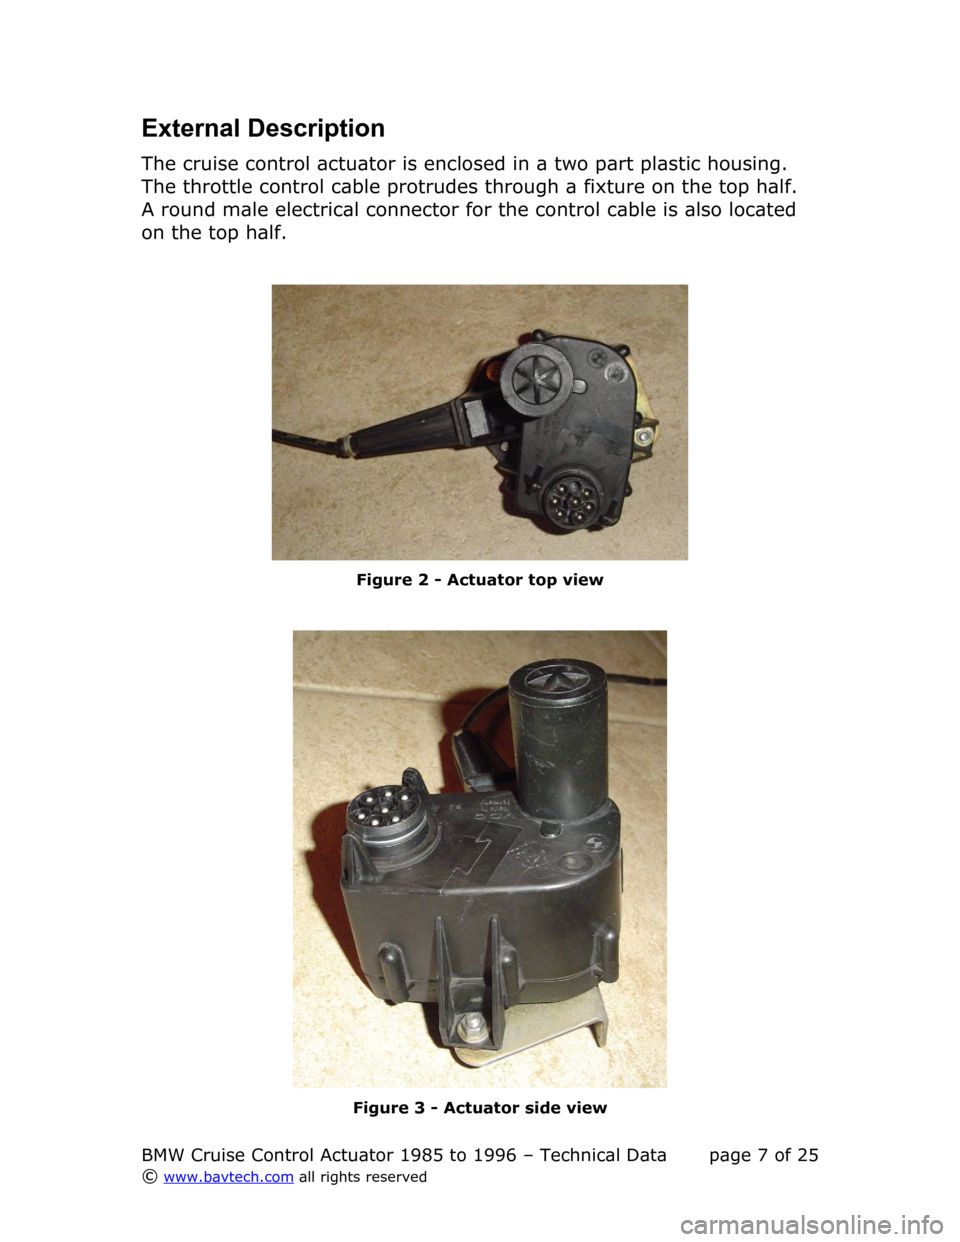 BMW 3 SERIES 1990 E36 Cruise Control Acutator External Description
The cruise control actuator is enclosed in a two part plastic housing.  
The throttle control cable protrudes through a fixture on the top half.  
A round male electrical connecto